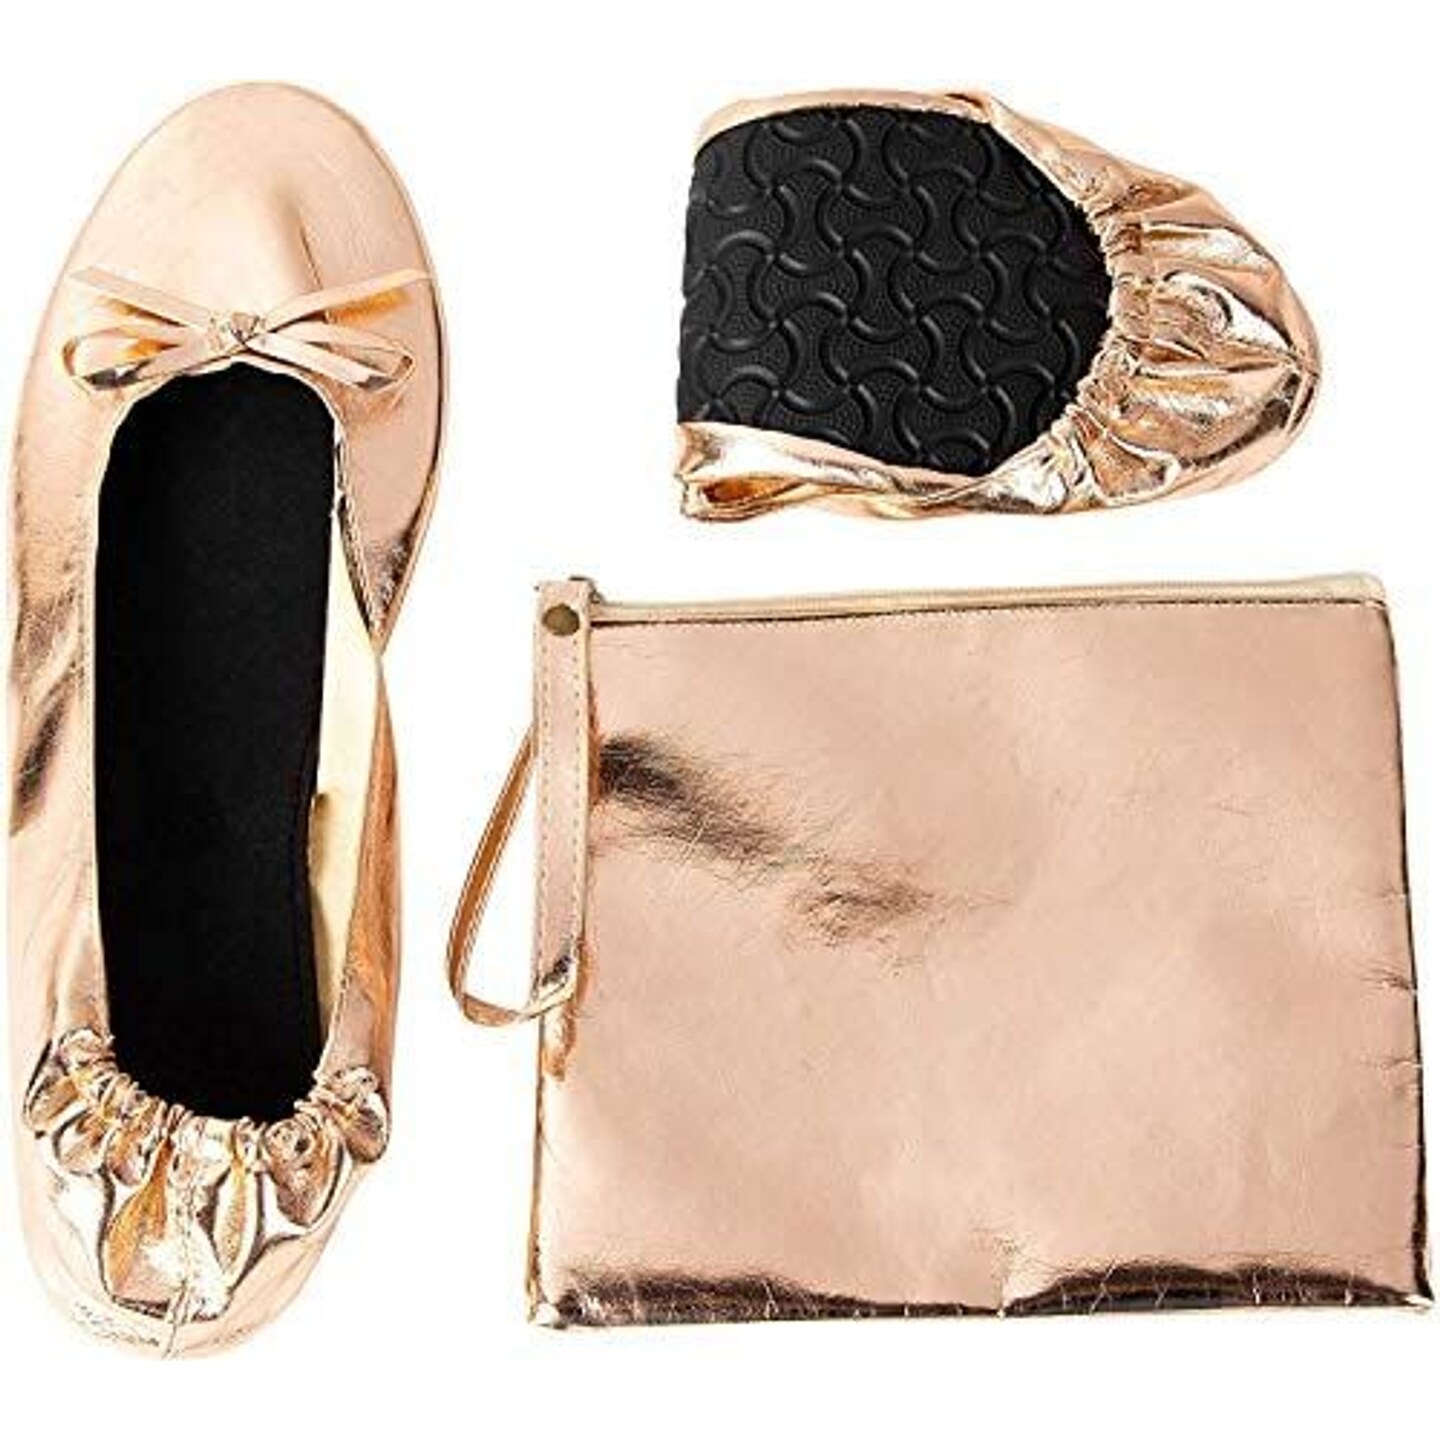 Rose Gold Foldable Ballet Flats for Women, Roll Up Flats with Zipper Pouch, US Size 8.5-9.5